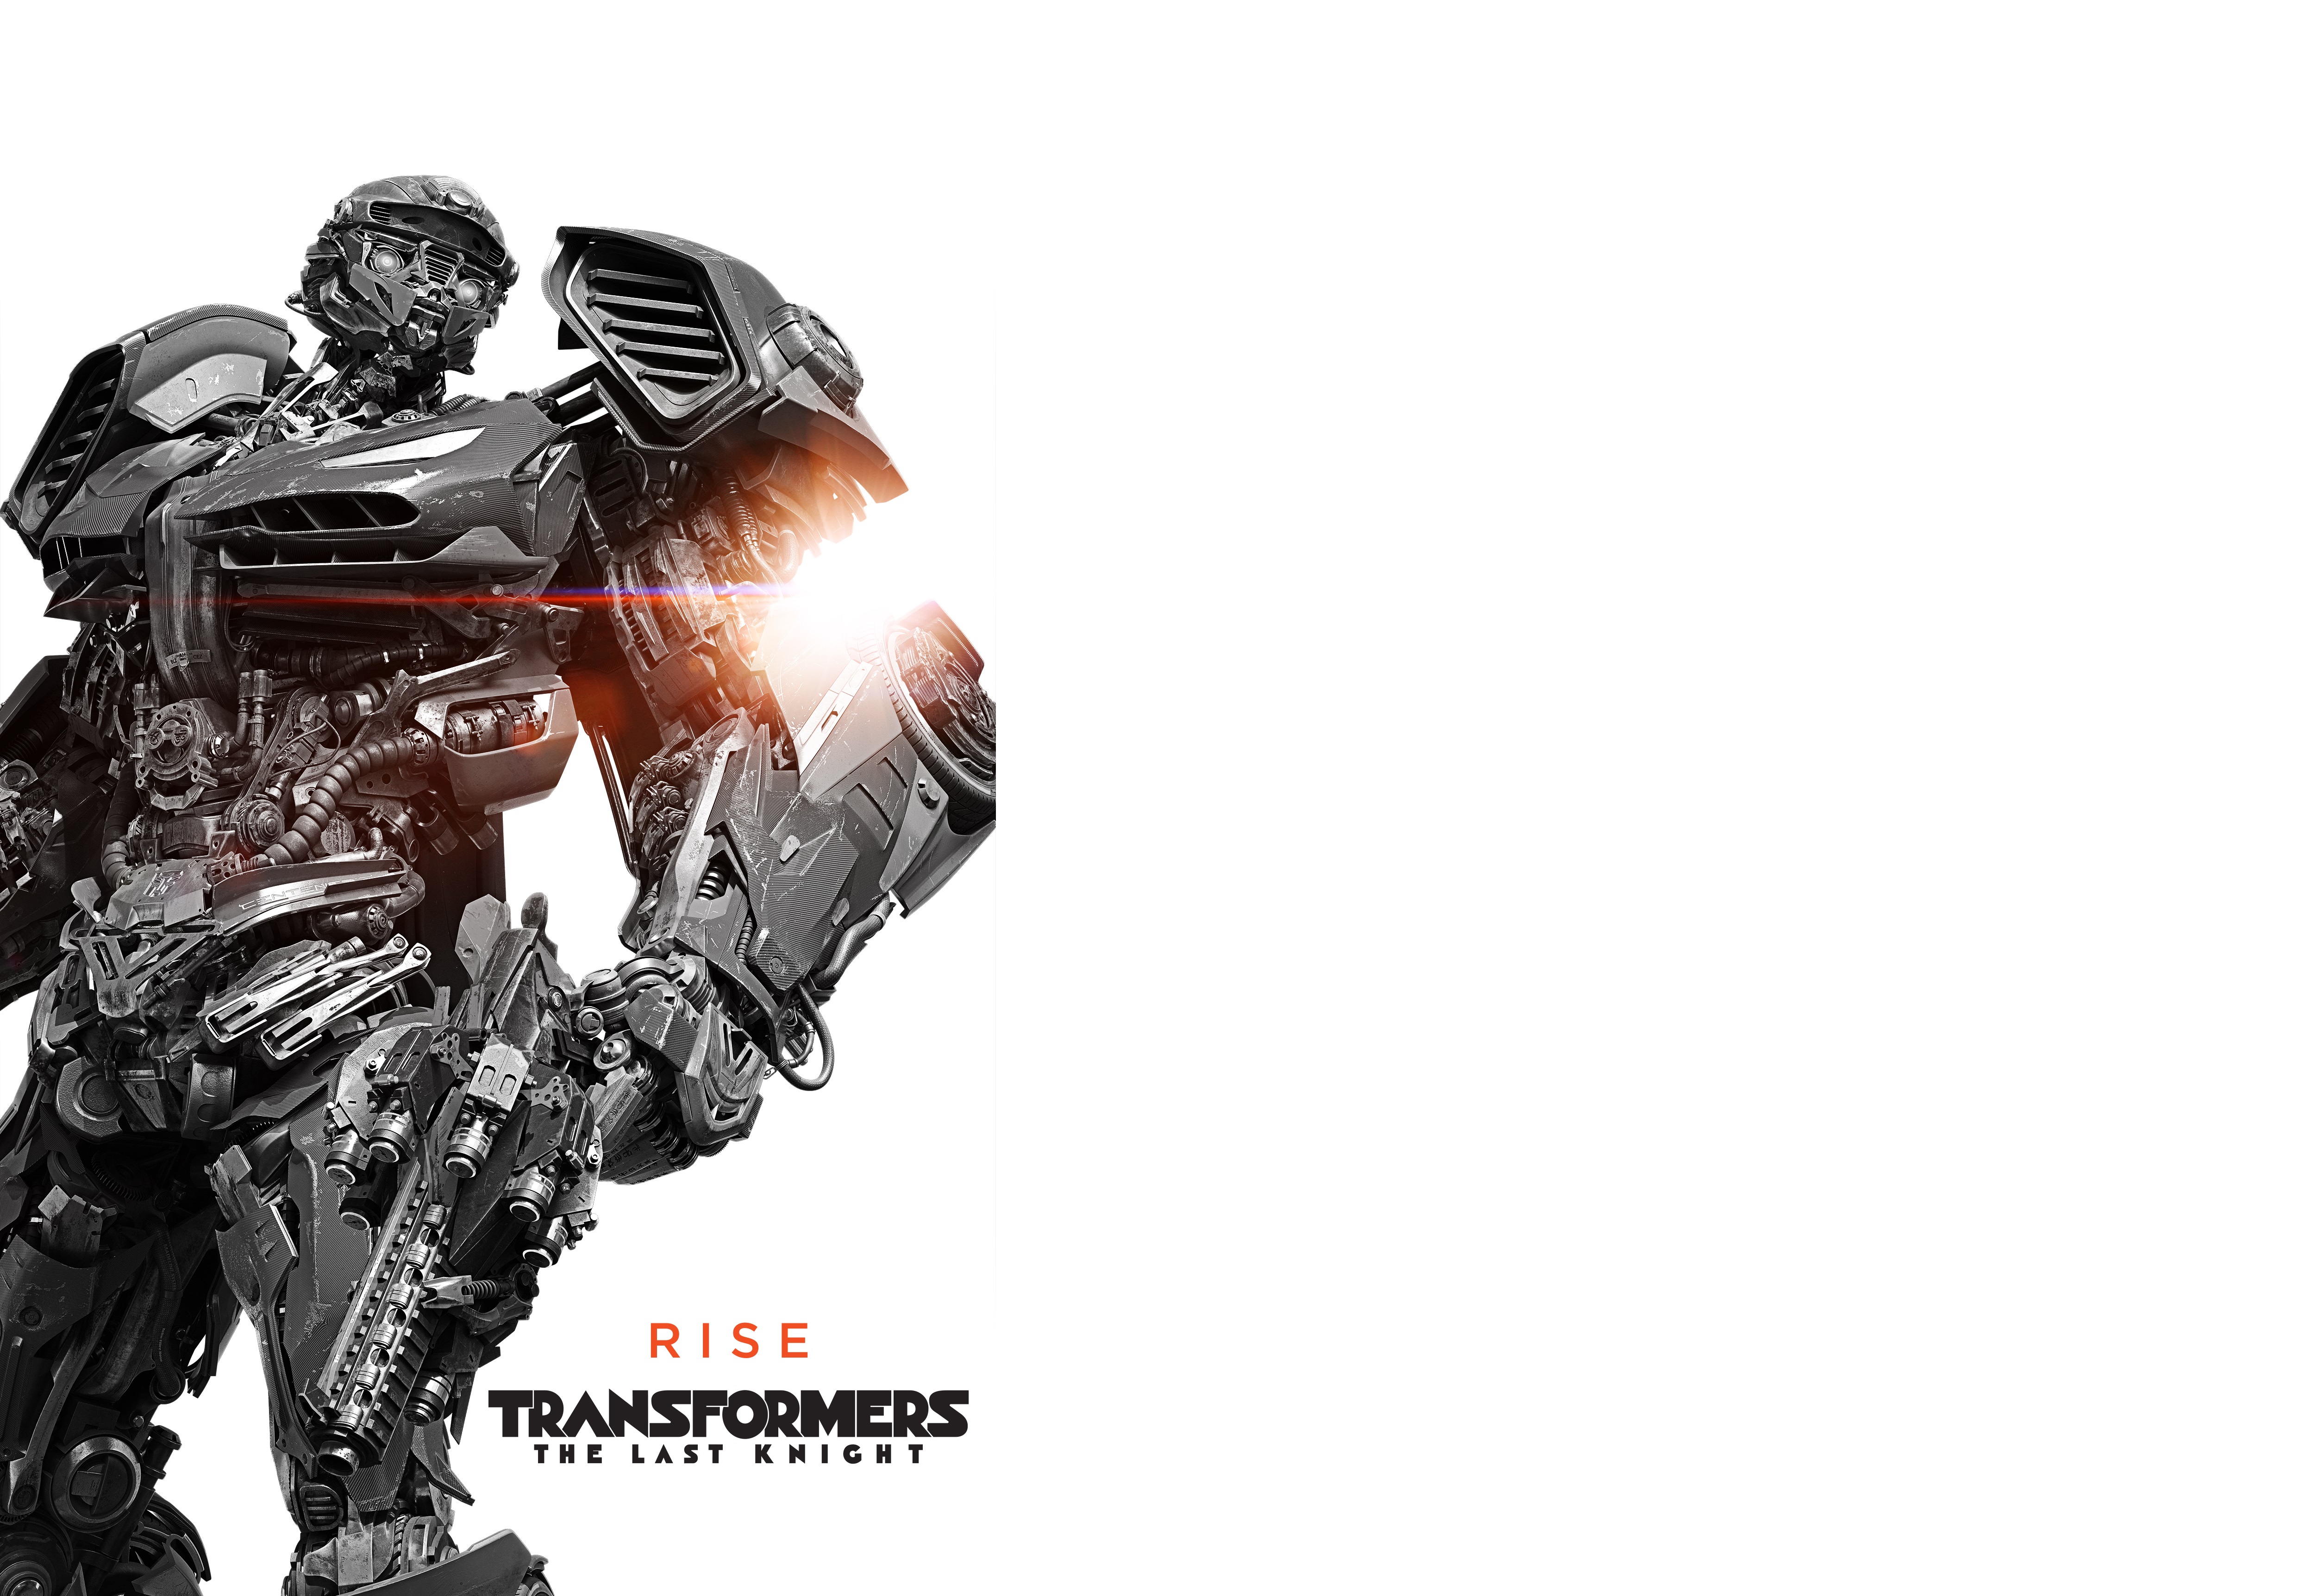 Hot Rod (Transformers) HD Wallpapers and Backgrounds